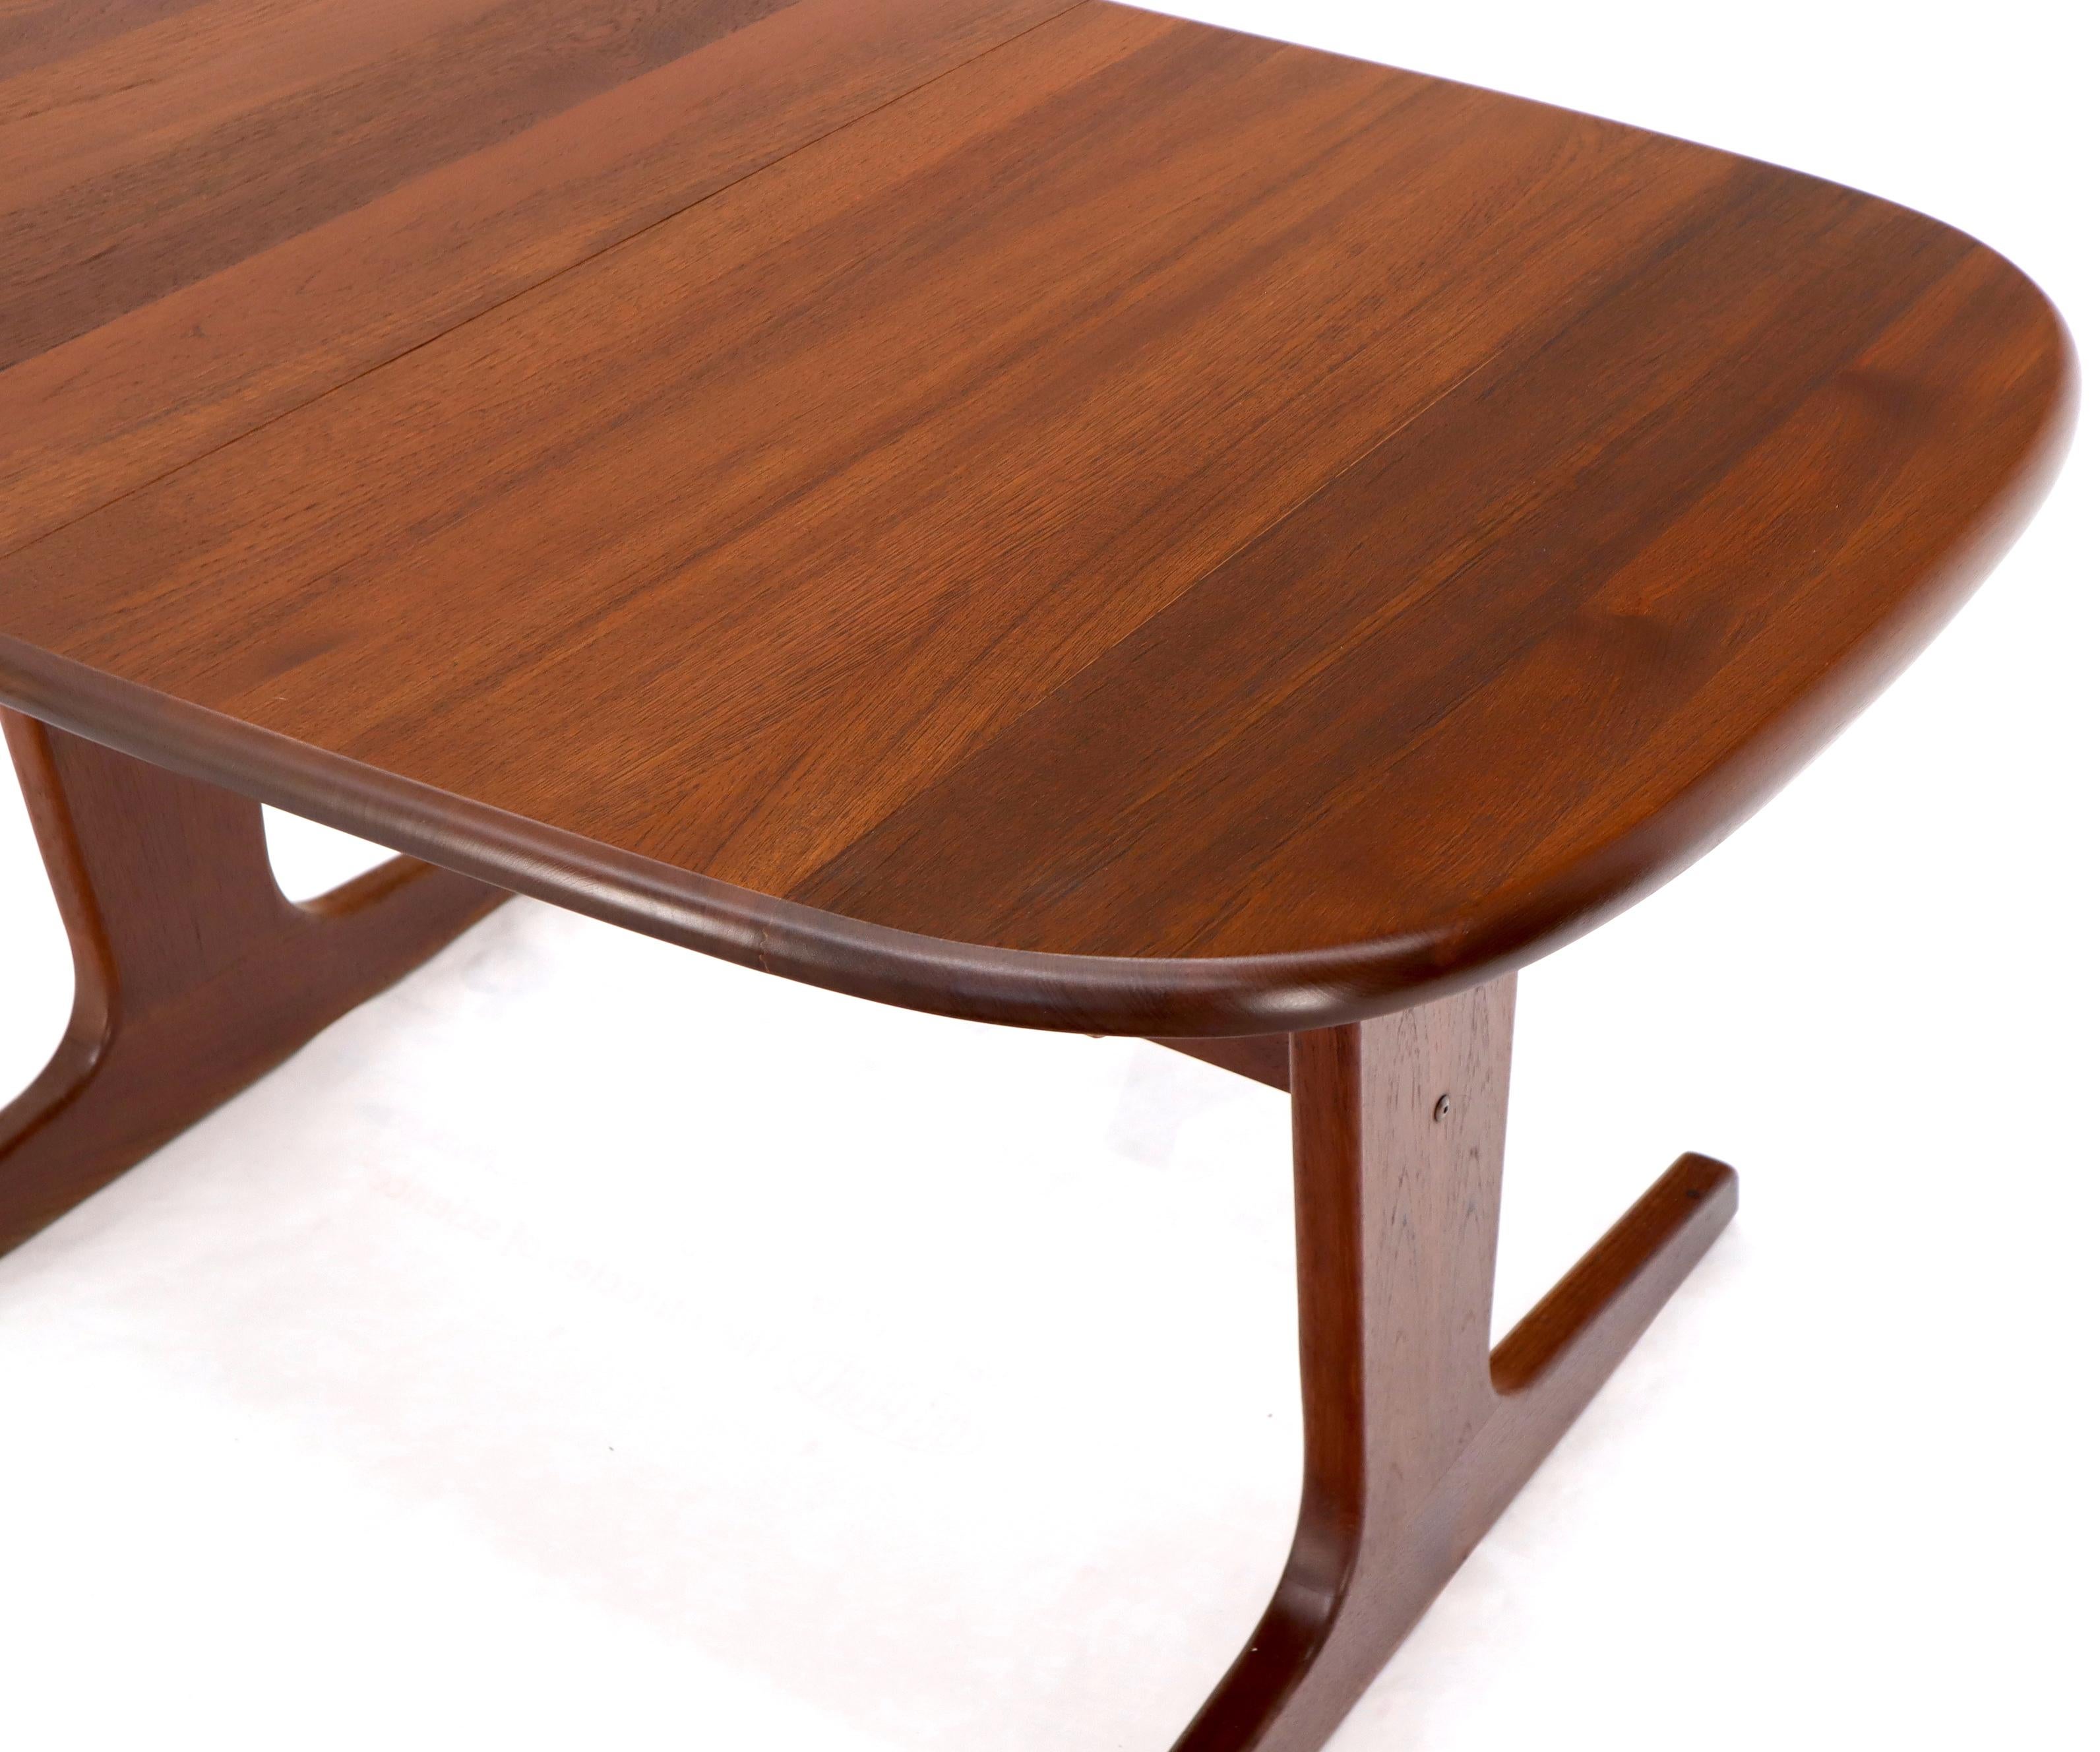 Compact Solid Teak Danish Mid-Century Modern Dining Table with Two Leaves In Excellent Condition For Sale In Rockaway, NJ